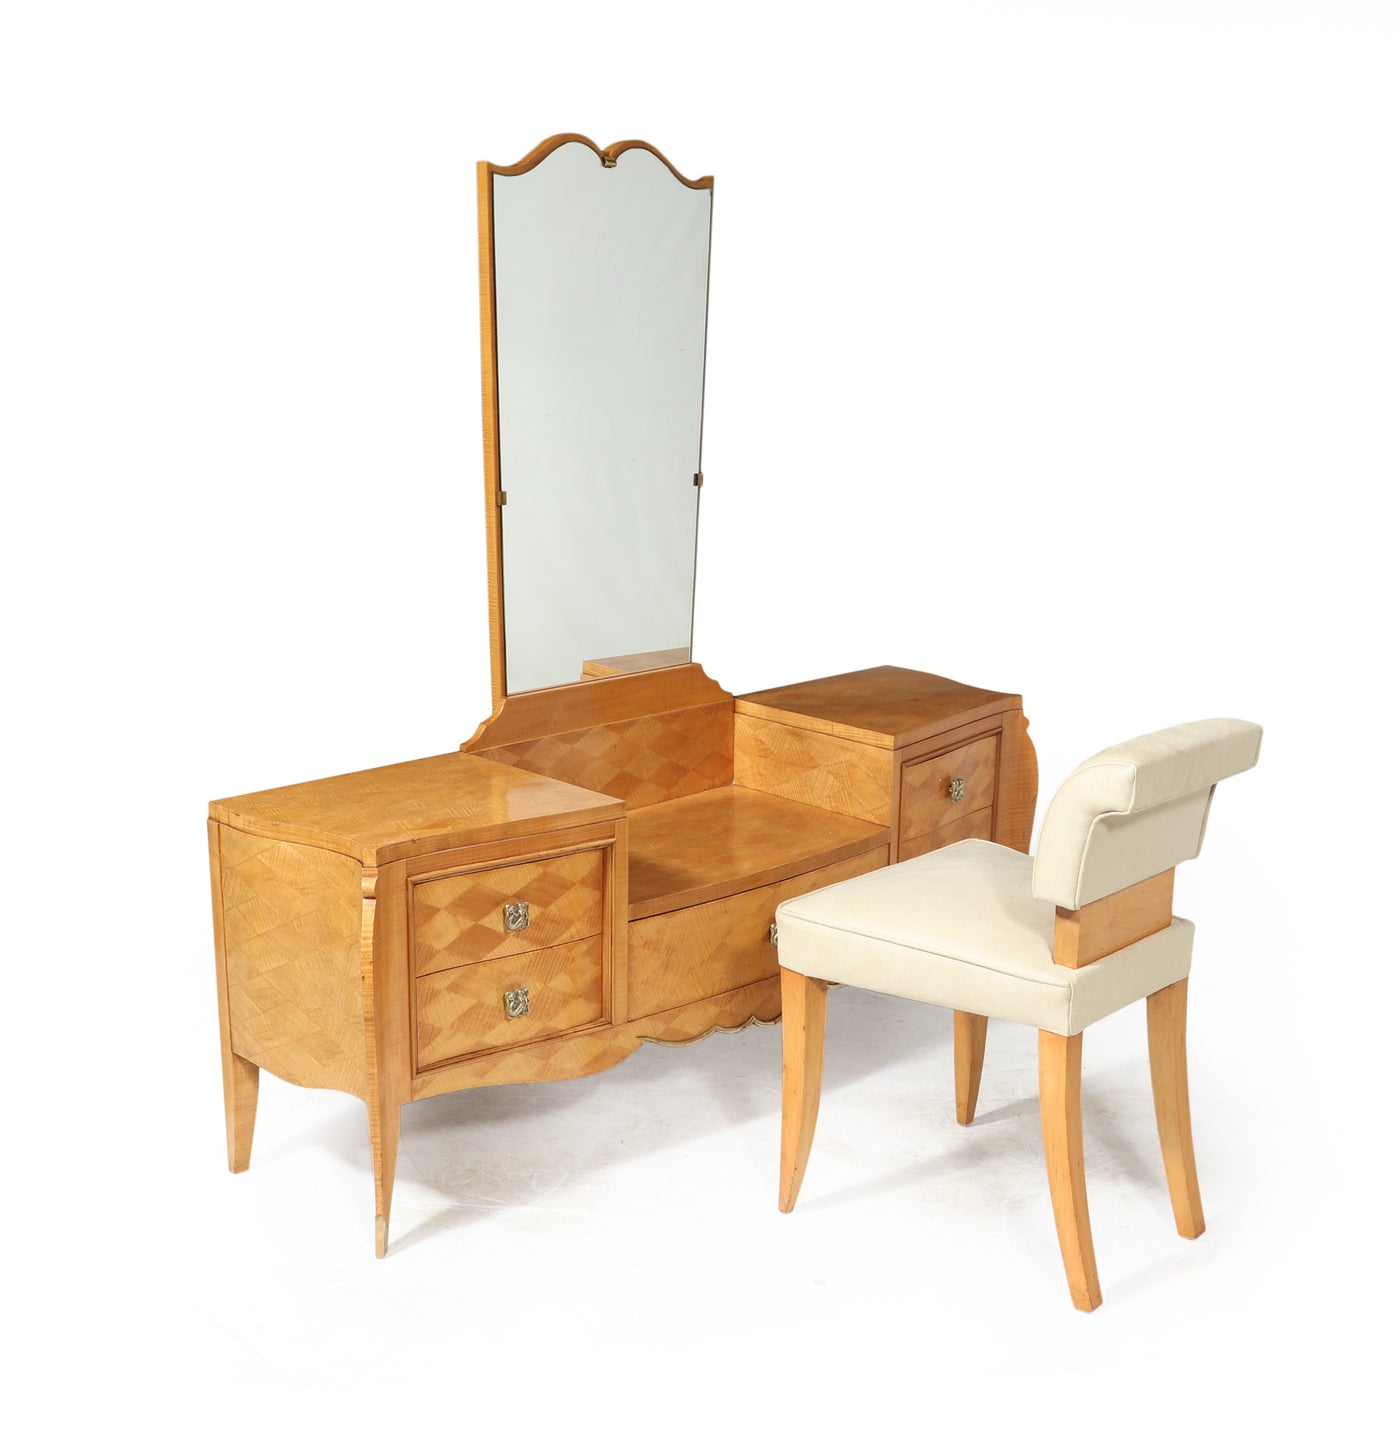  Art Deco Dressing Table and Stool  side